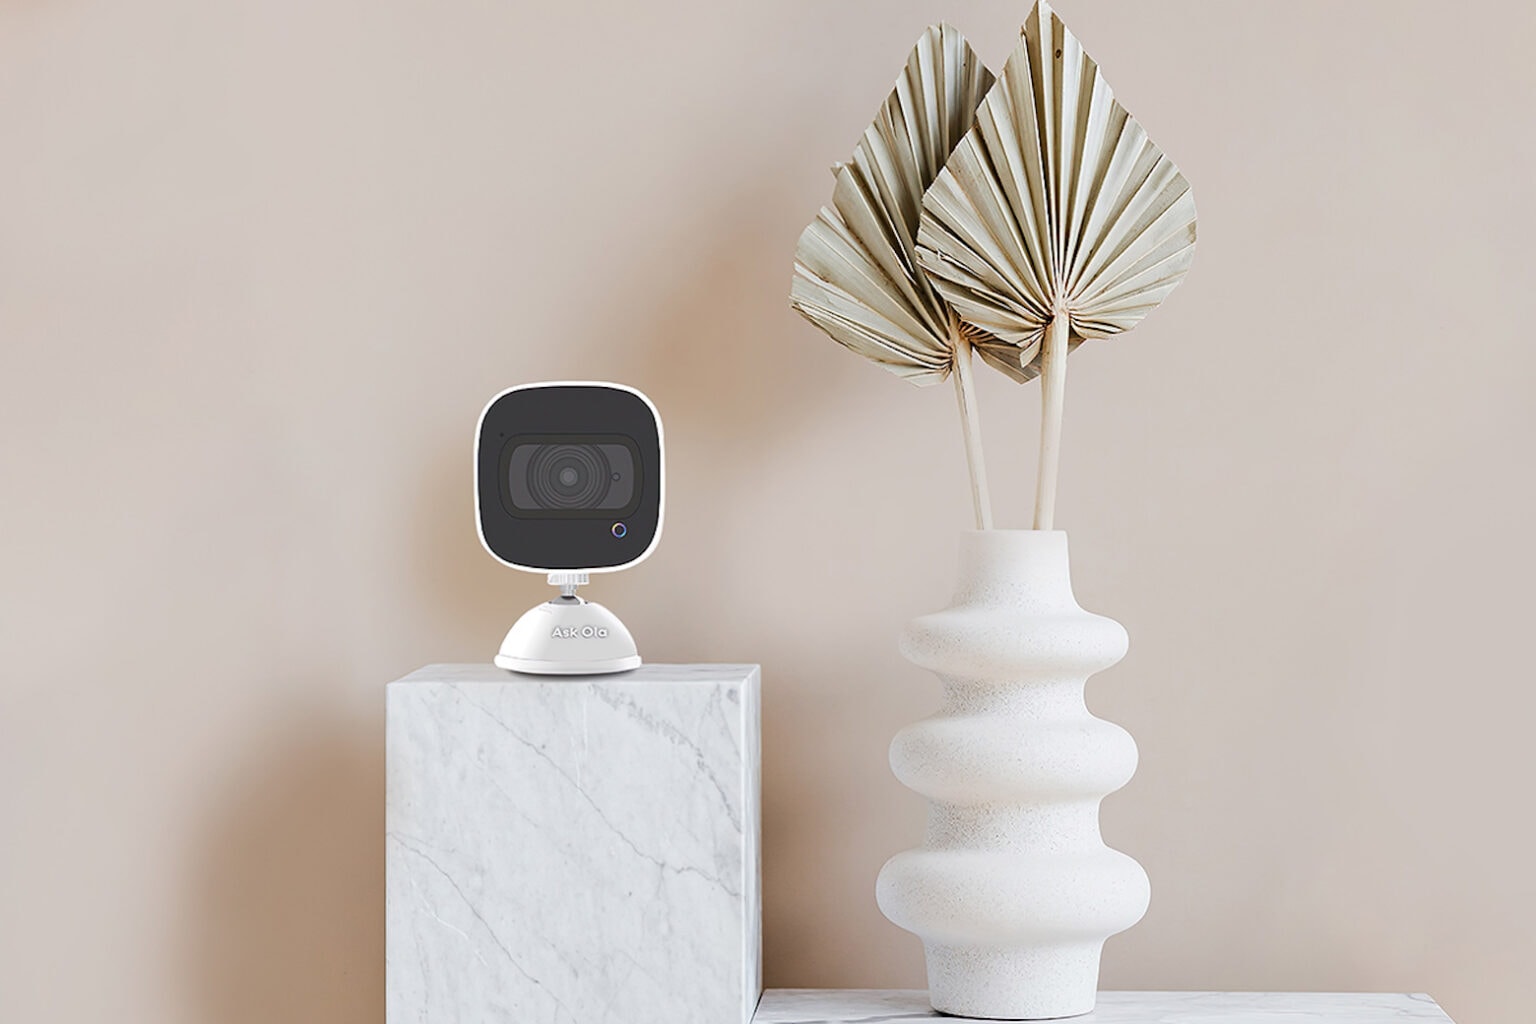 Score this smart security camera on sale now.